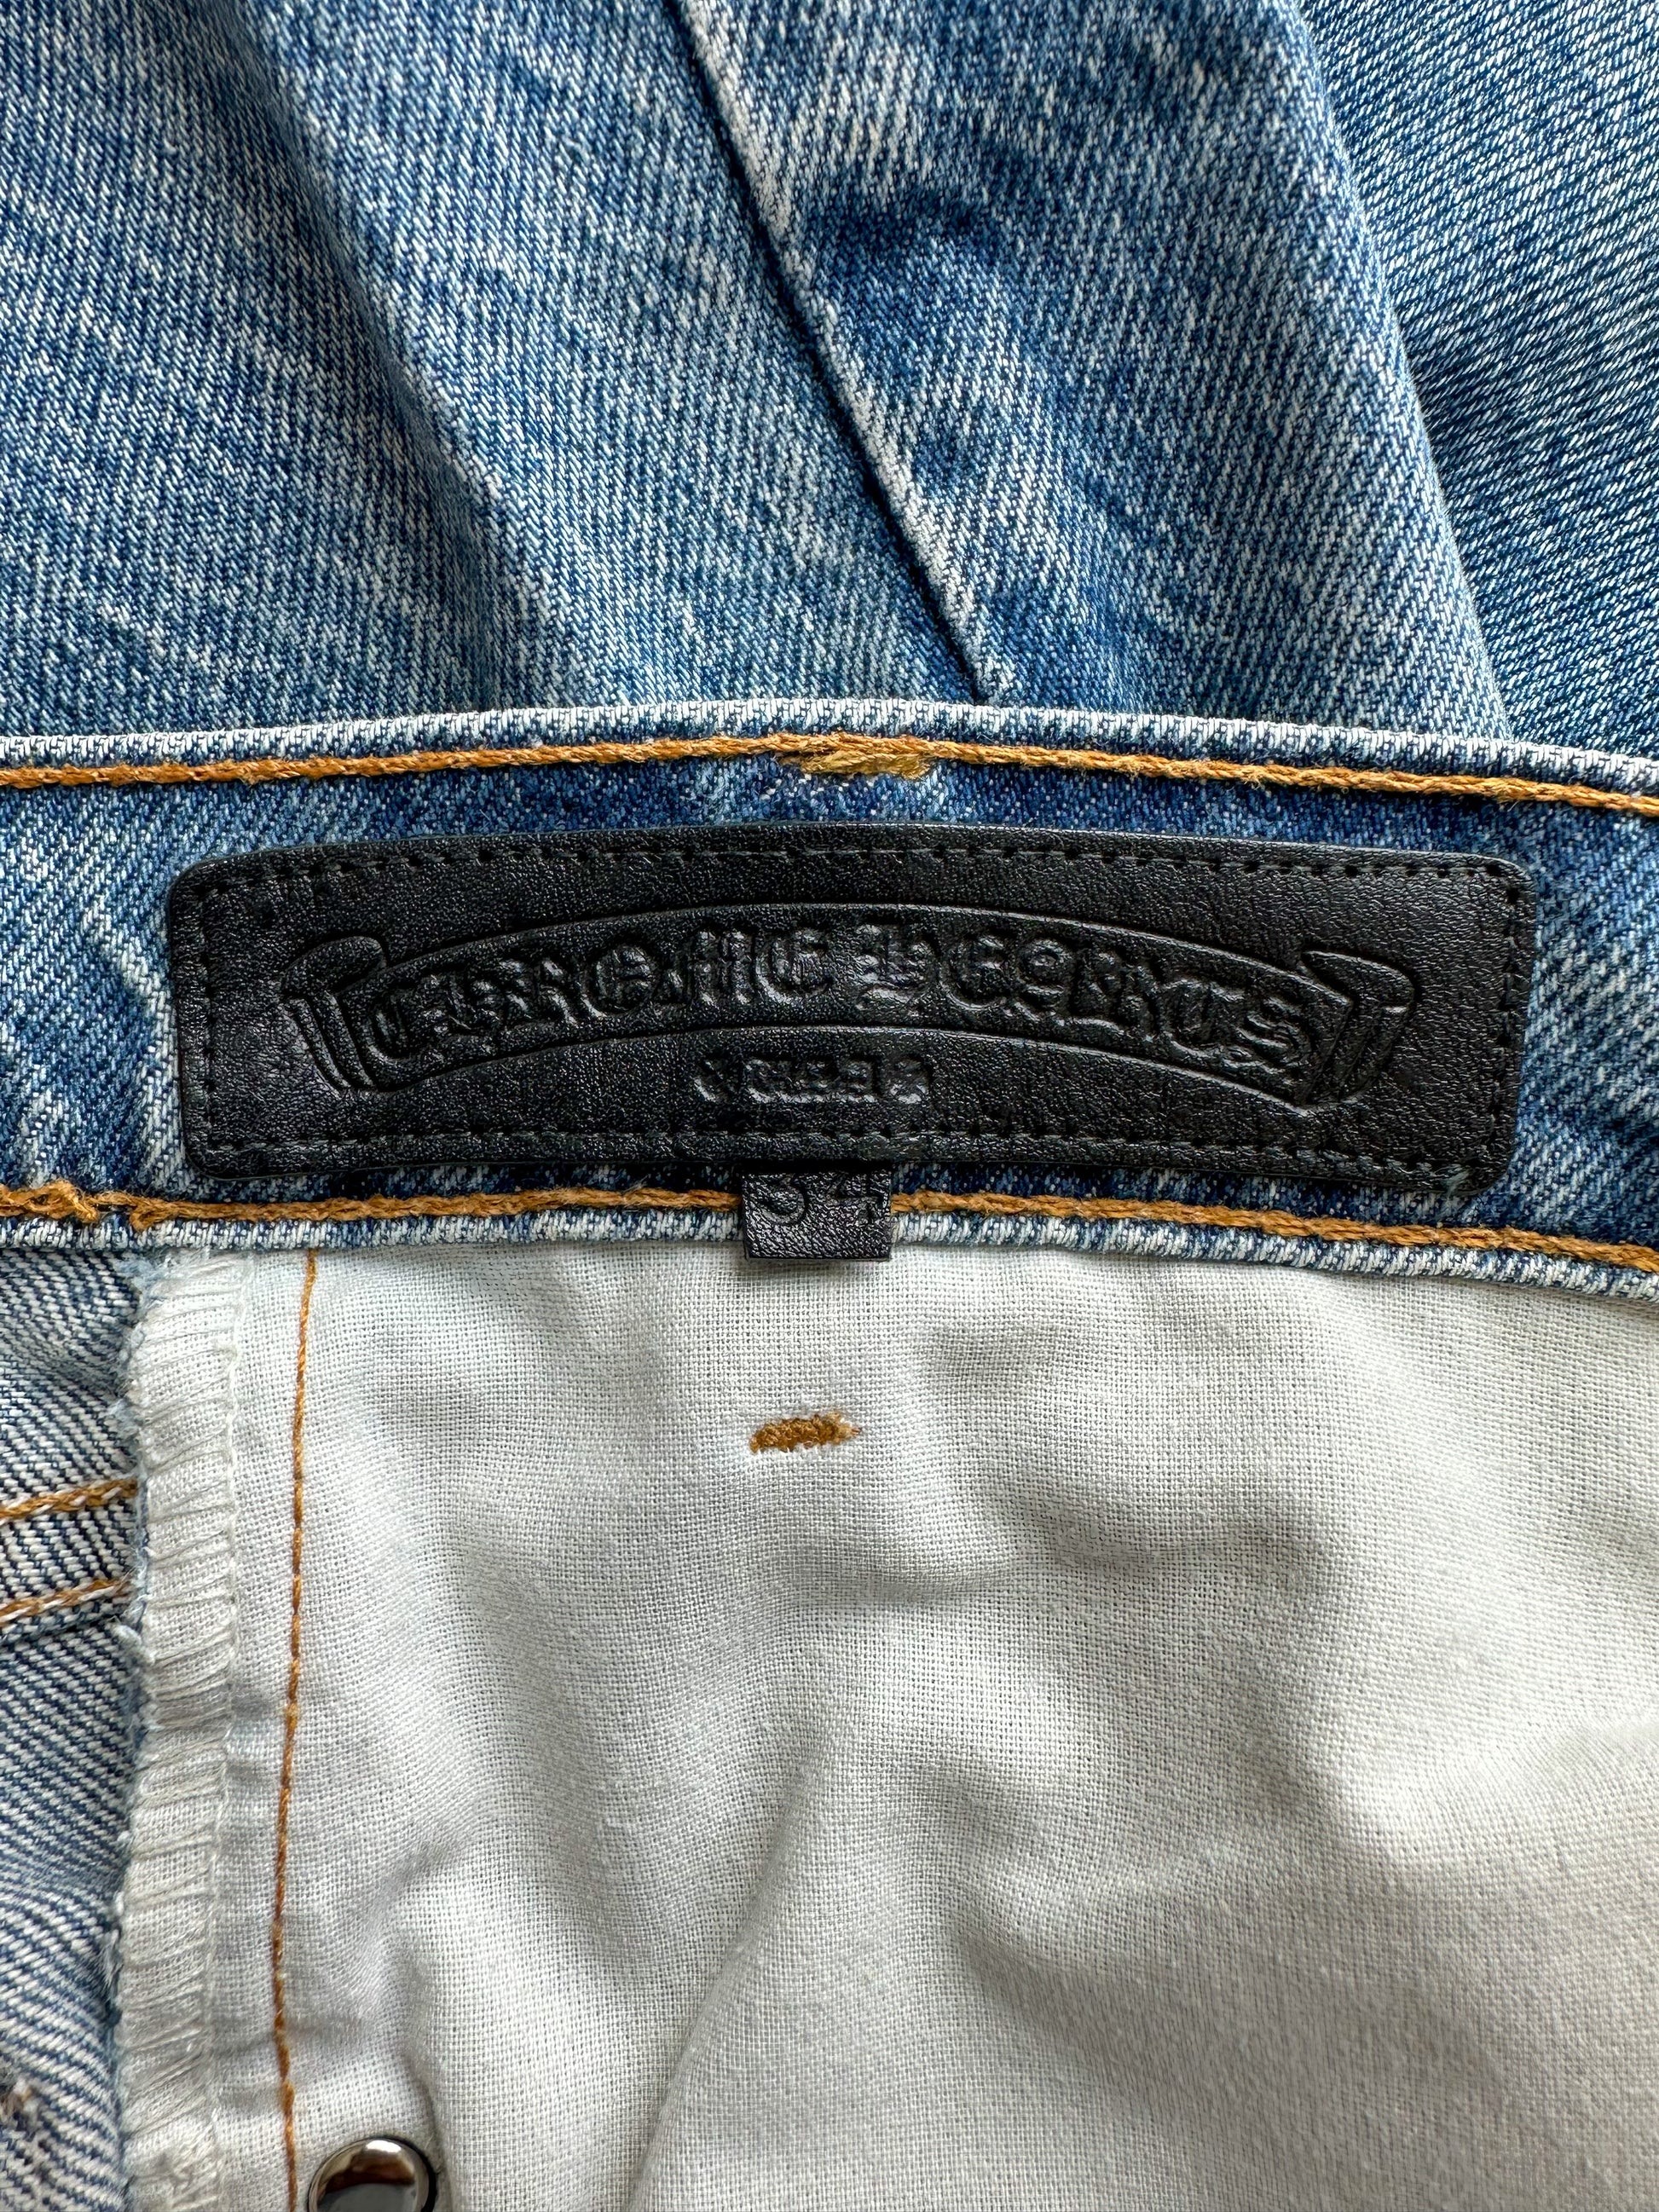 CHROME HEARTS LIGHT BLUE DENIM JEANS IN BLACK LEATHER CROSS PATCH